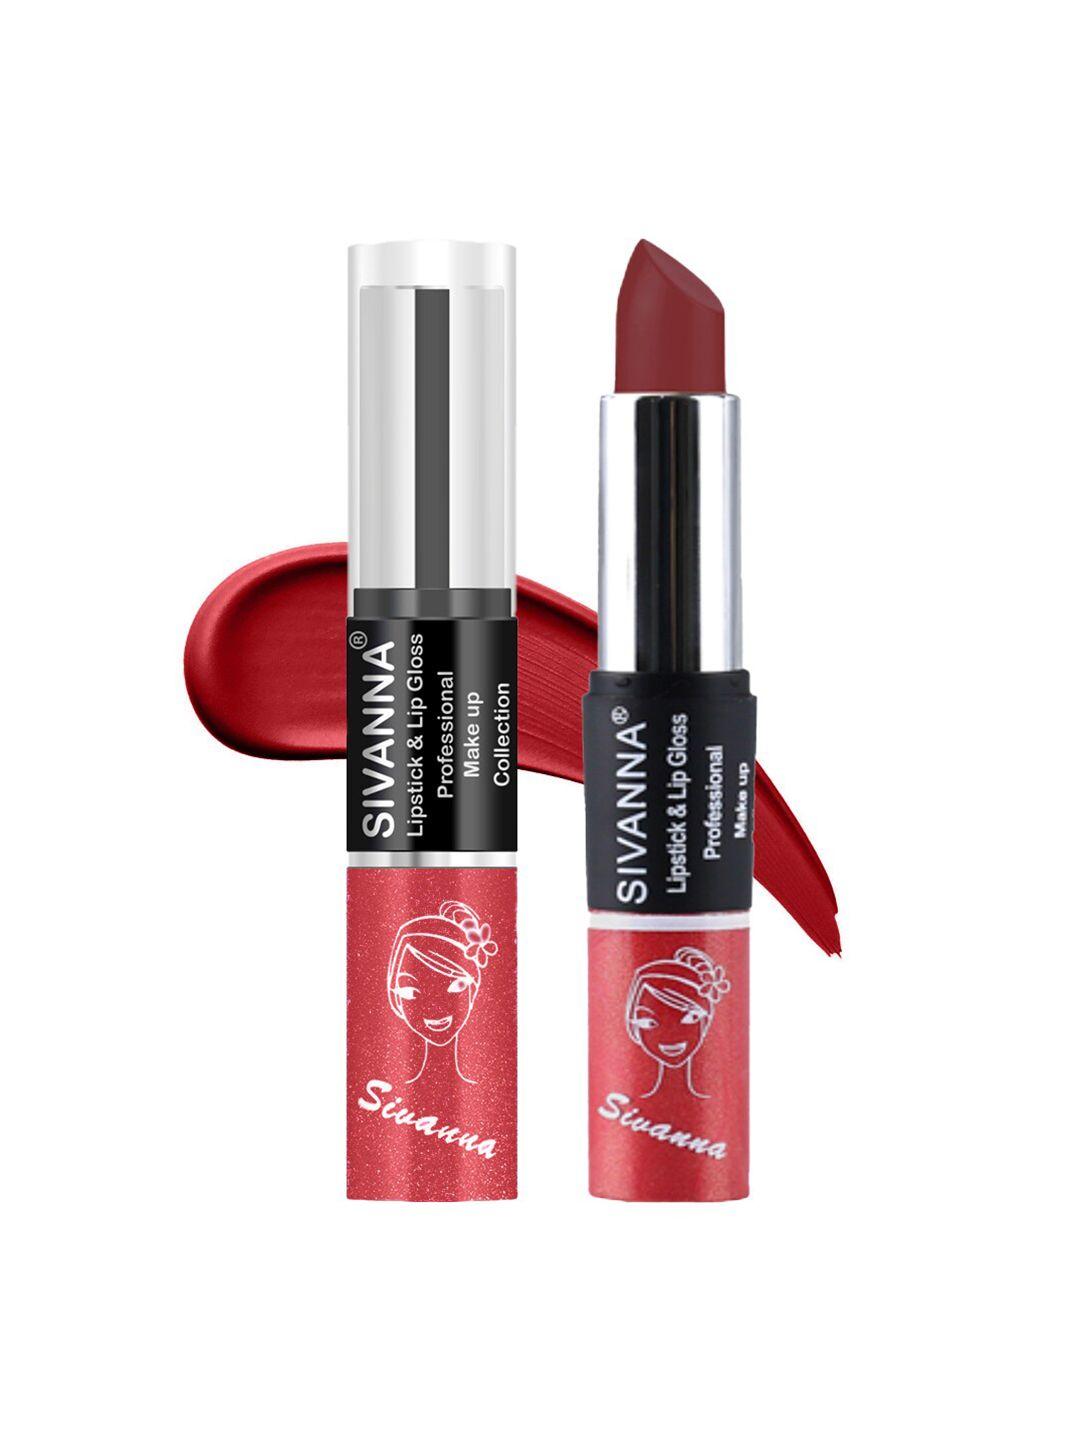 sivanna colors professional makeup collection 2 in 1 lipstick & lip gloss - dk061 16